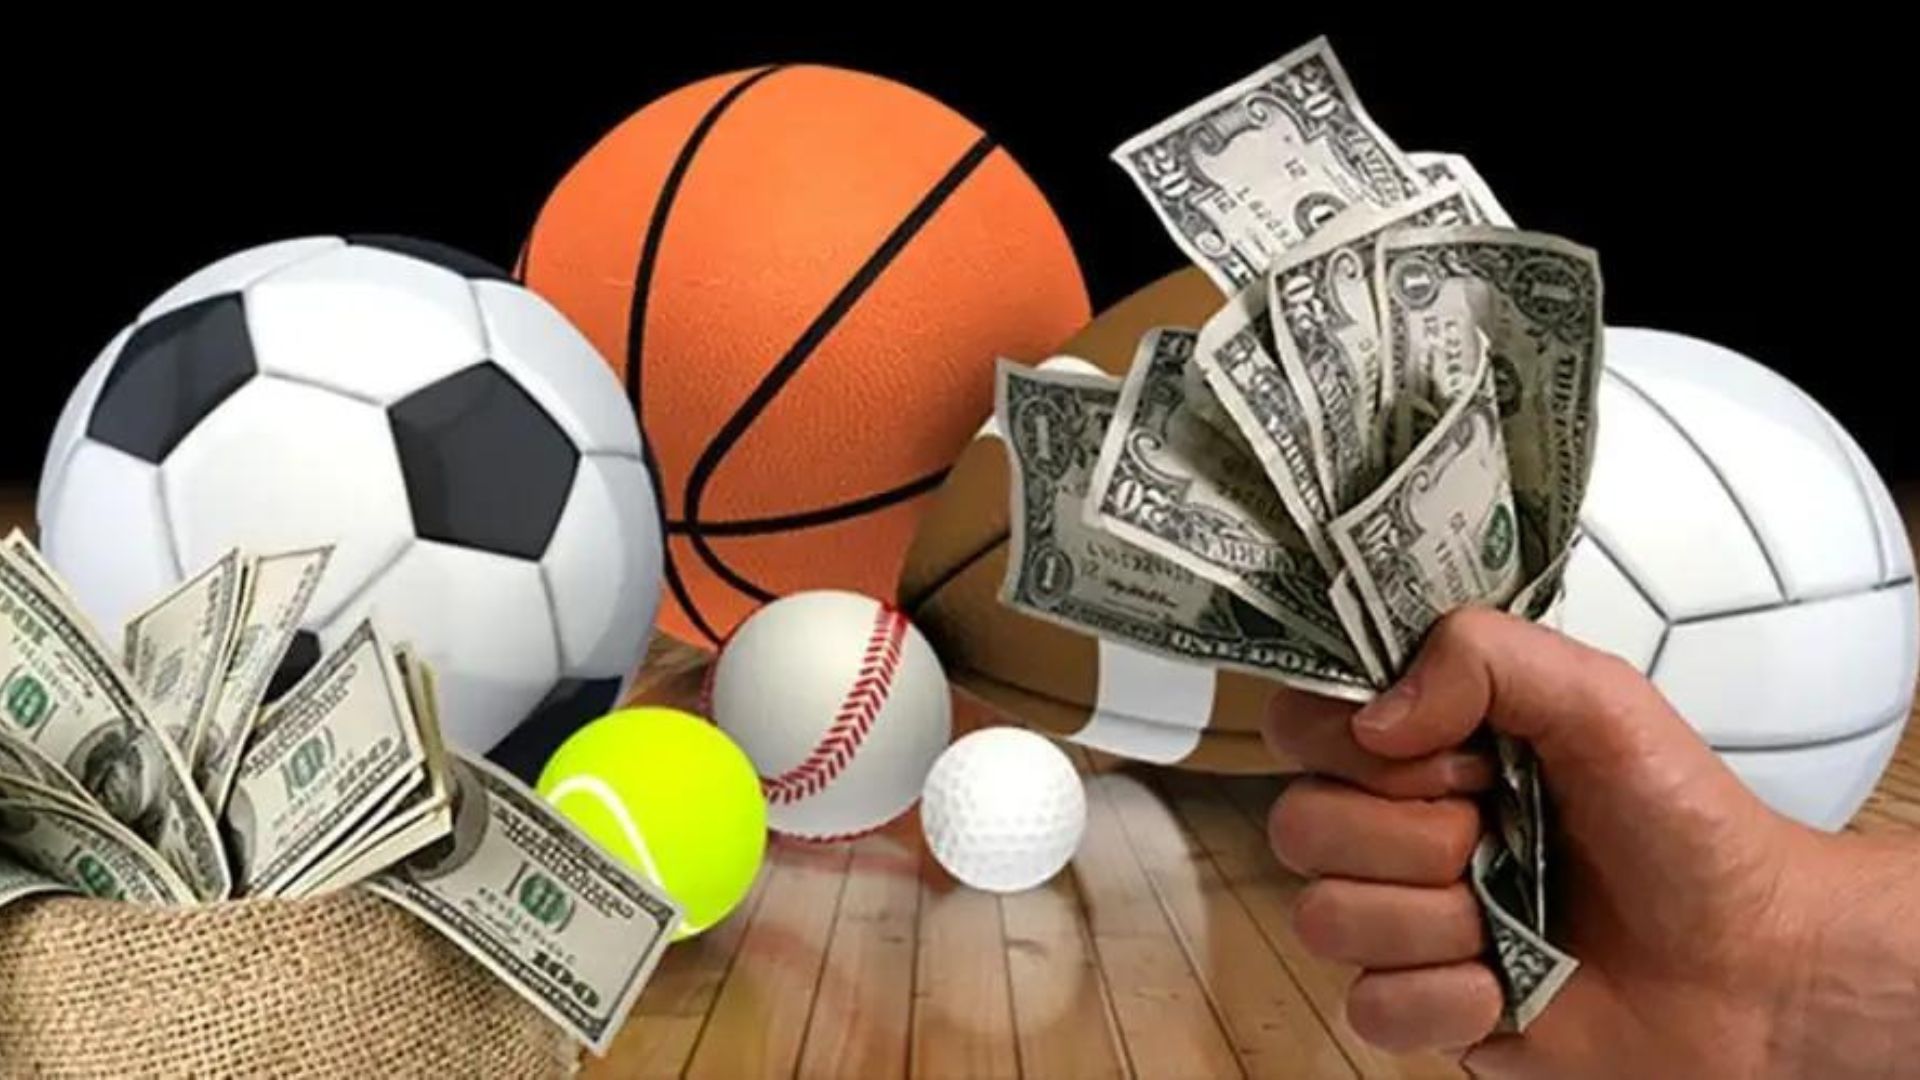 How To Make Sports Betting More Fun And Exciting - Taking Your Bets To The Next Level